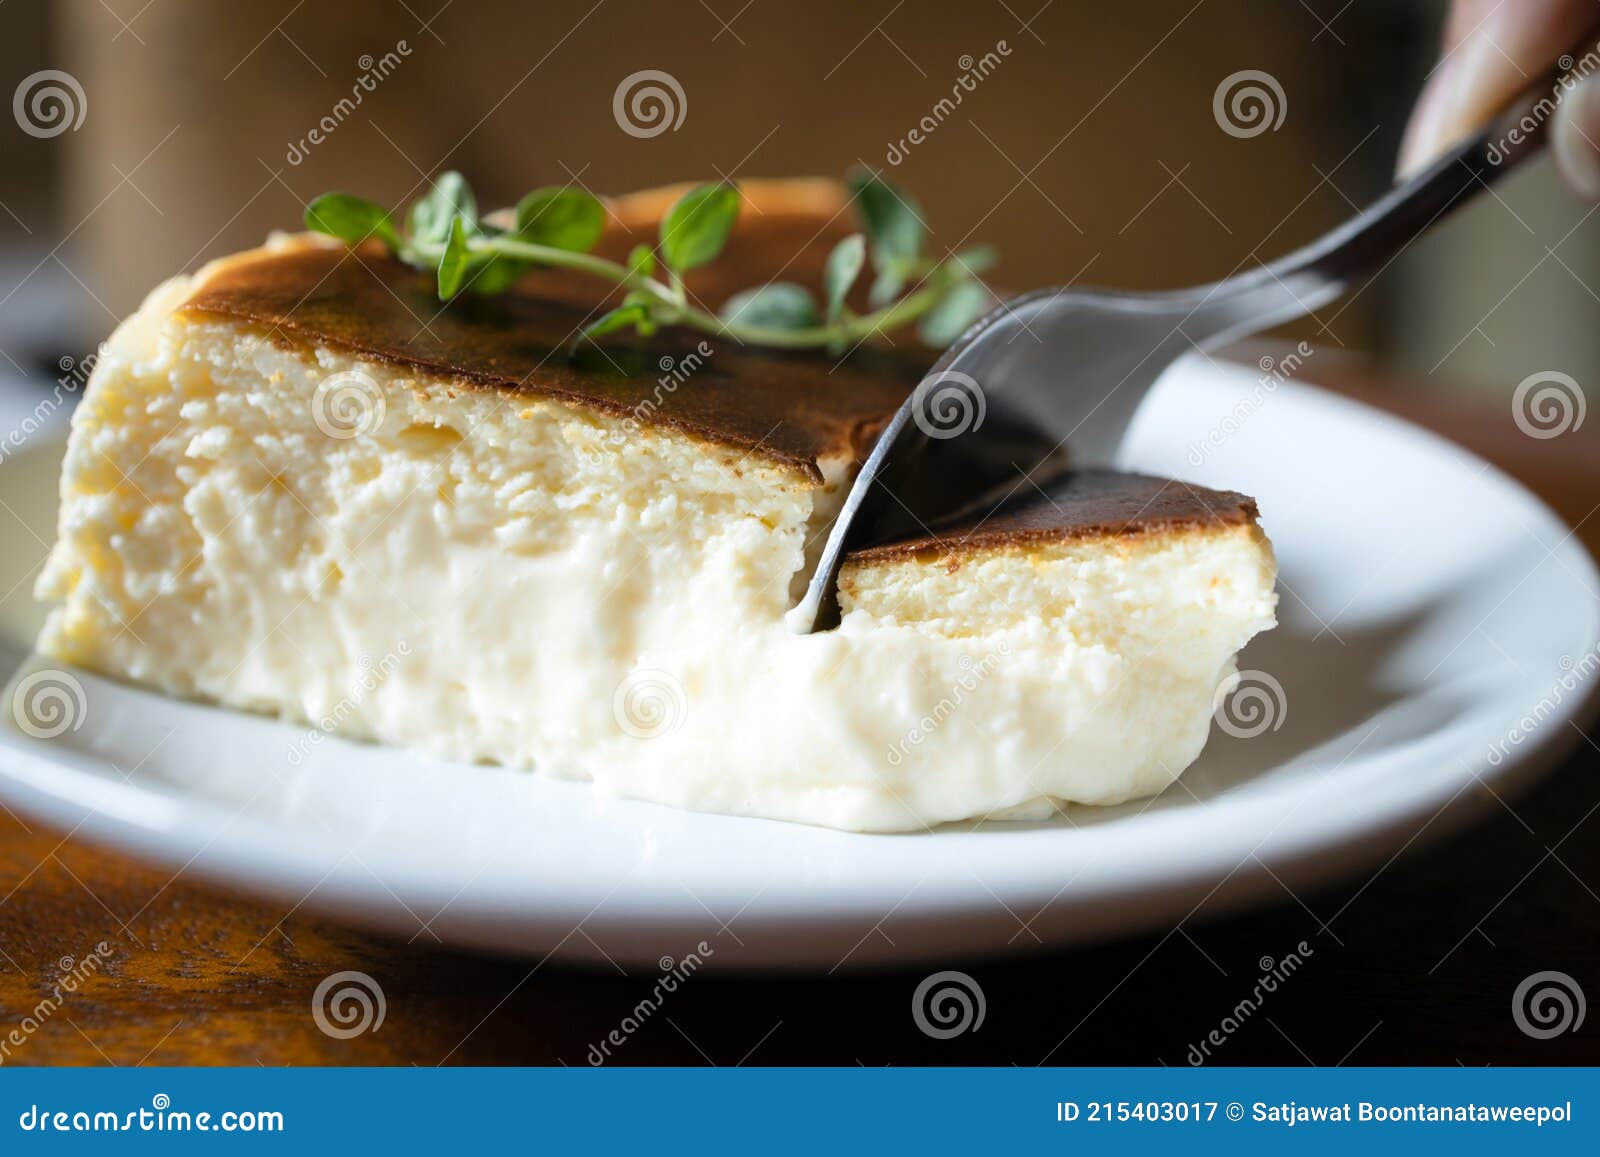 close up,basque burnt cheesecake,tarta de queso or san sebastian cheesecake on a white plate with a spoon to scoop the soft cheese